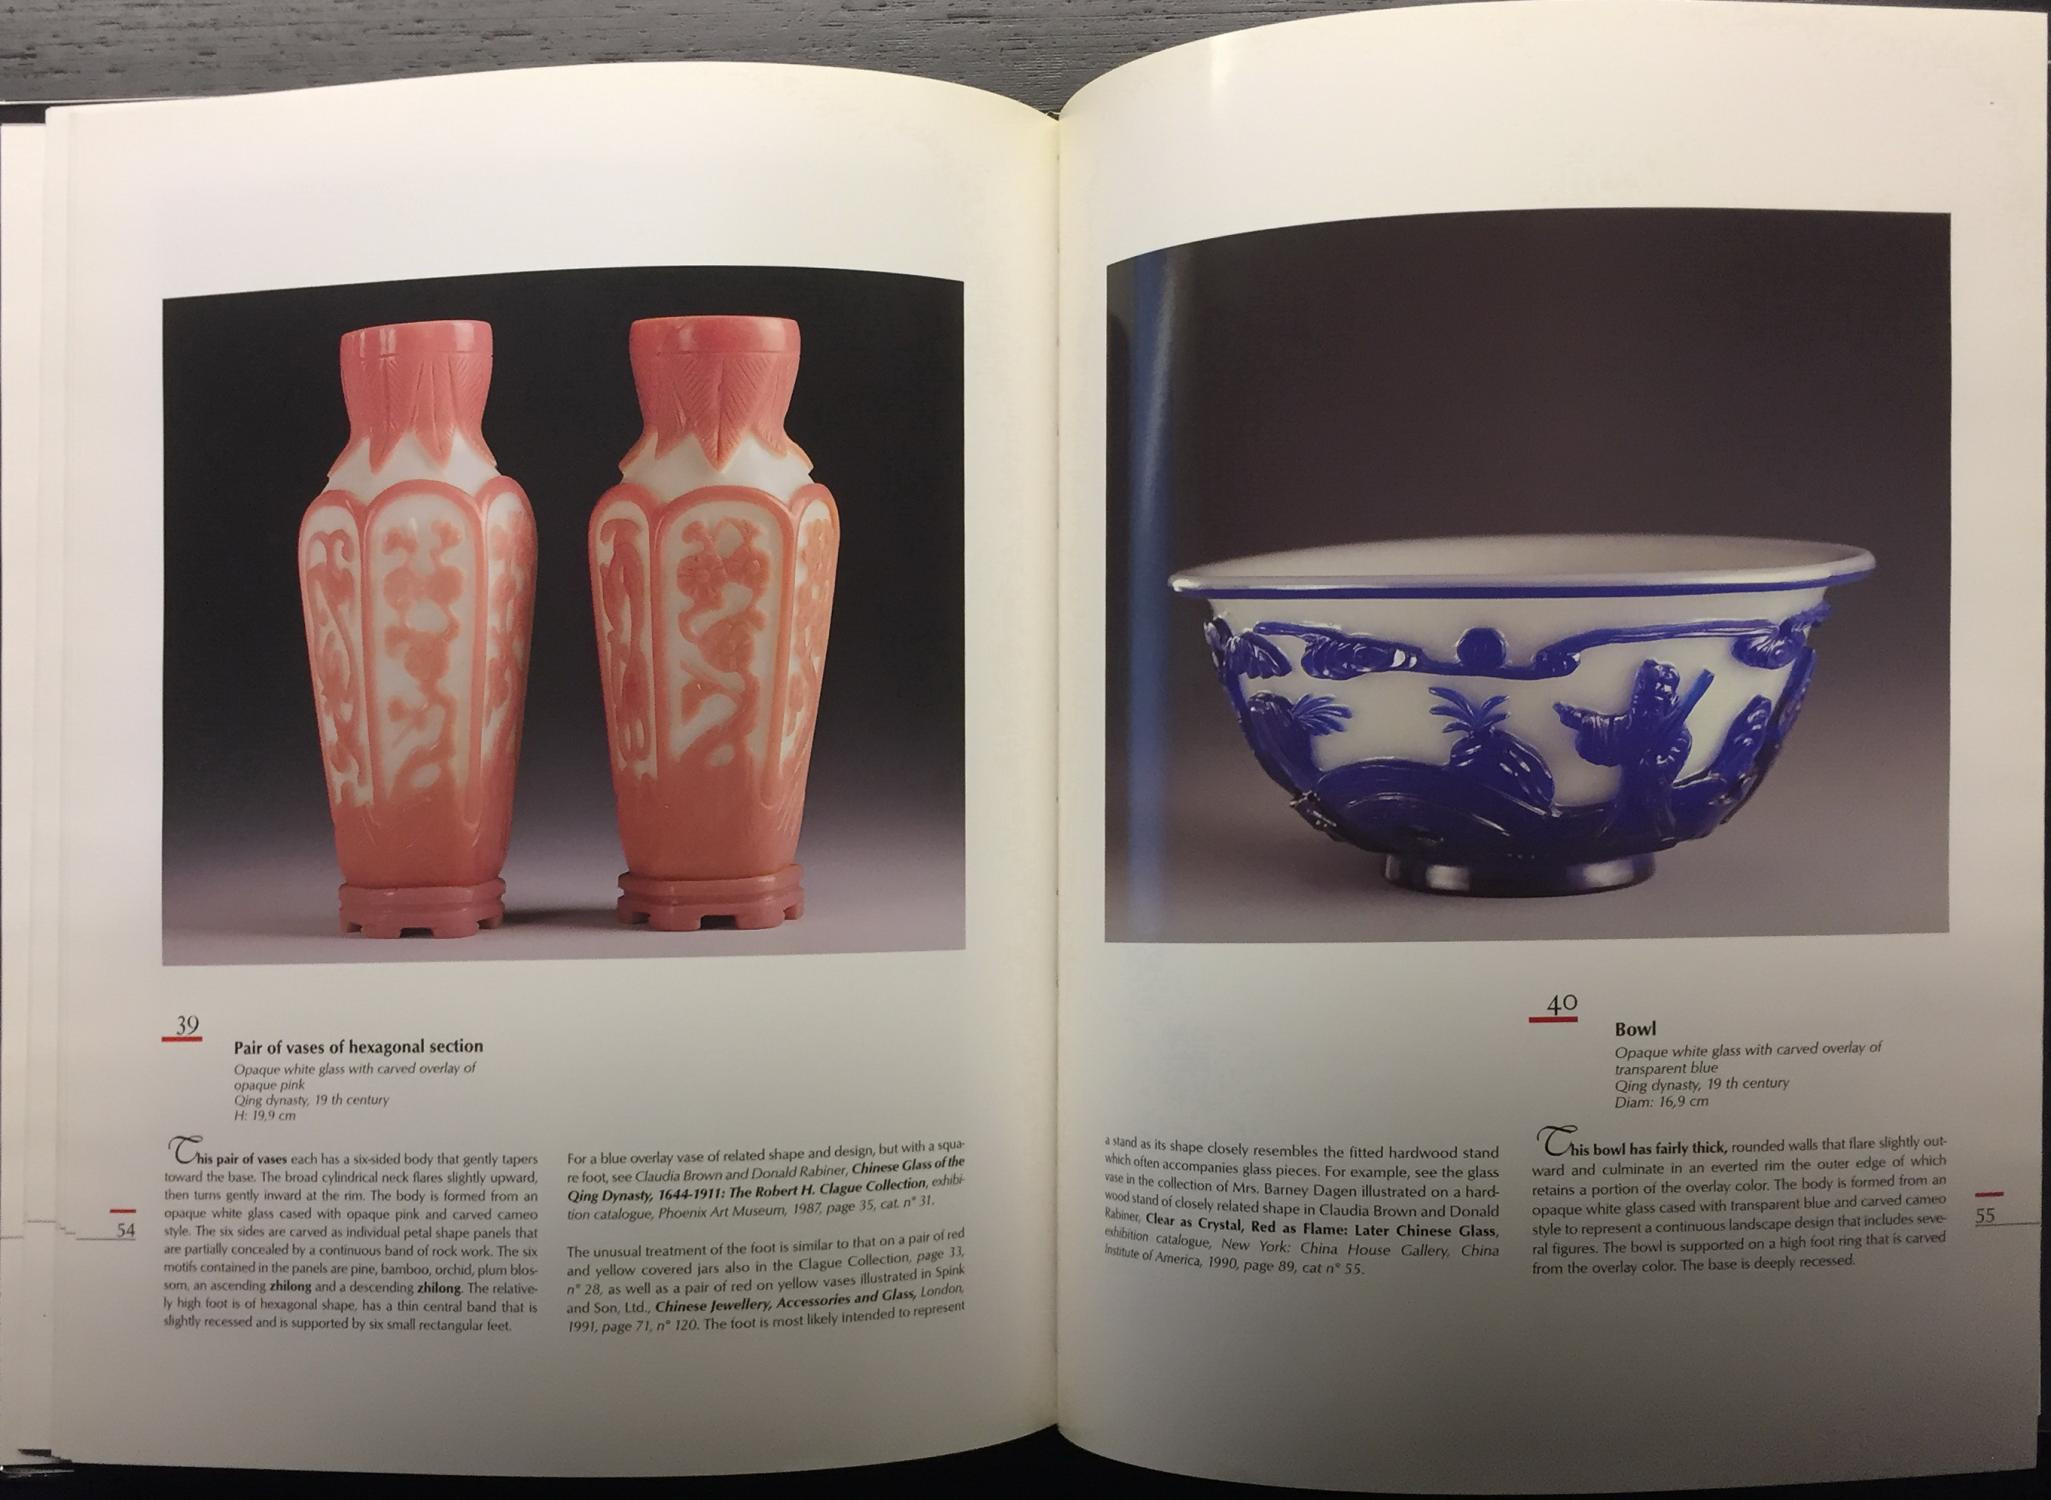 Qianlong Vase Price Of Treasures Of Chinese Glass Work Shops Selection Of Chinese Qing Regarding Treasures Of Chinese Glass Work Shops Selection Of Chinese Qing Dynasty Glass In the Ina